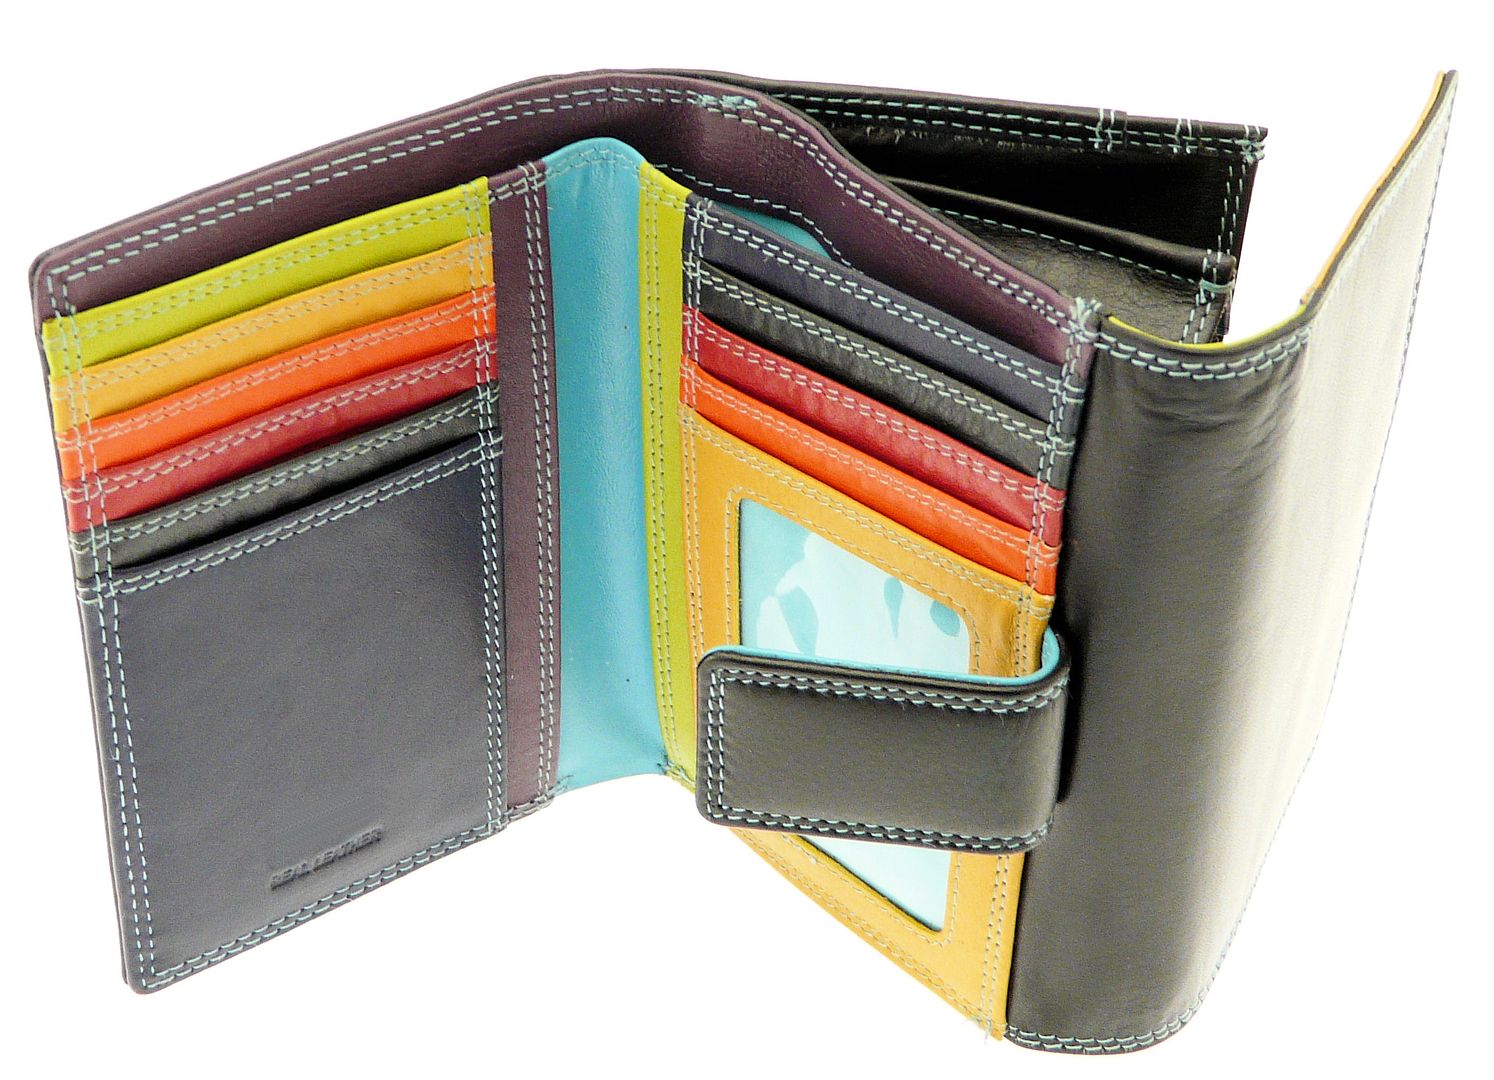 Ladies Real Leather Wallet Purse & Credit Card Holder With Coin Purse / Section | eBay